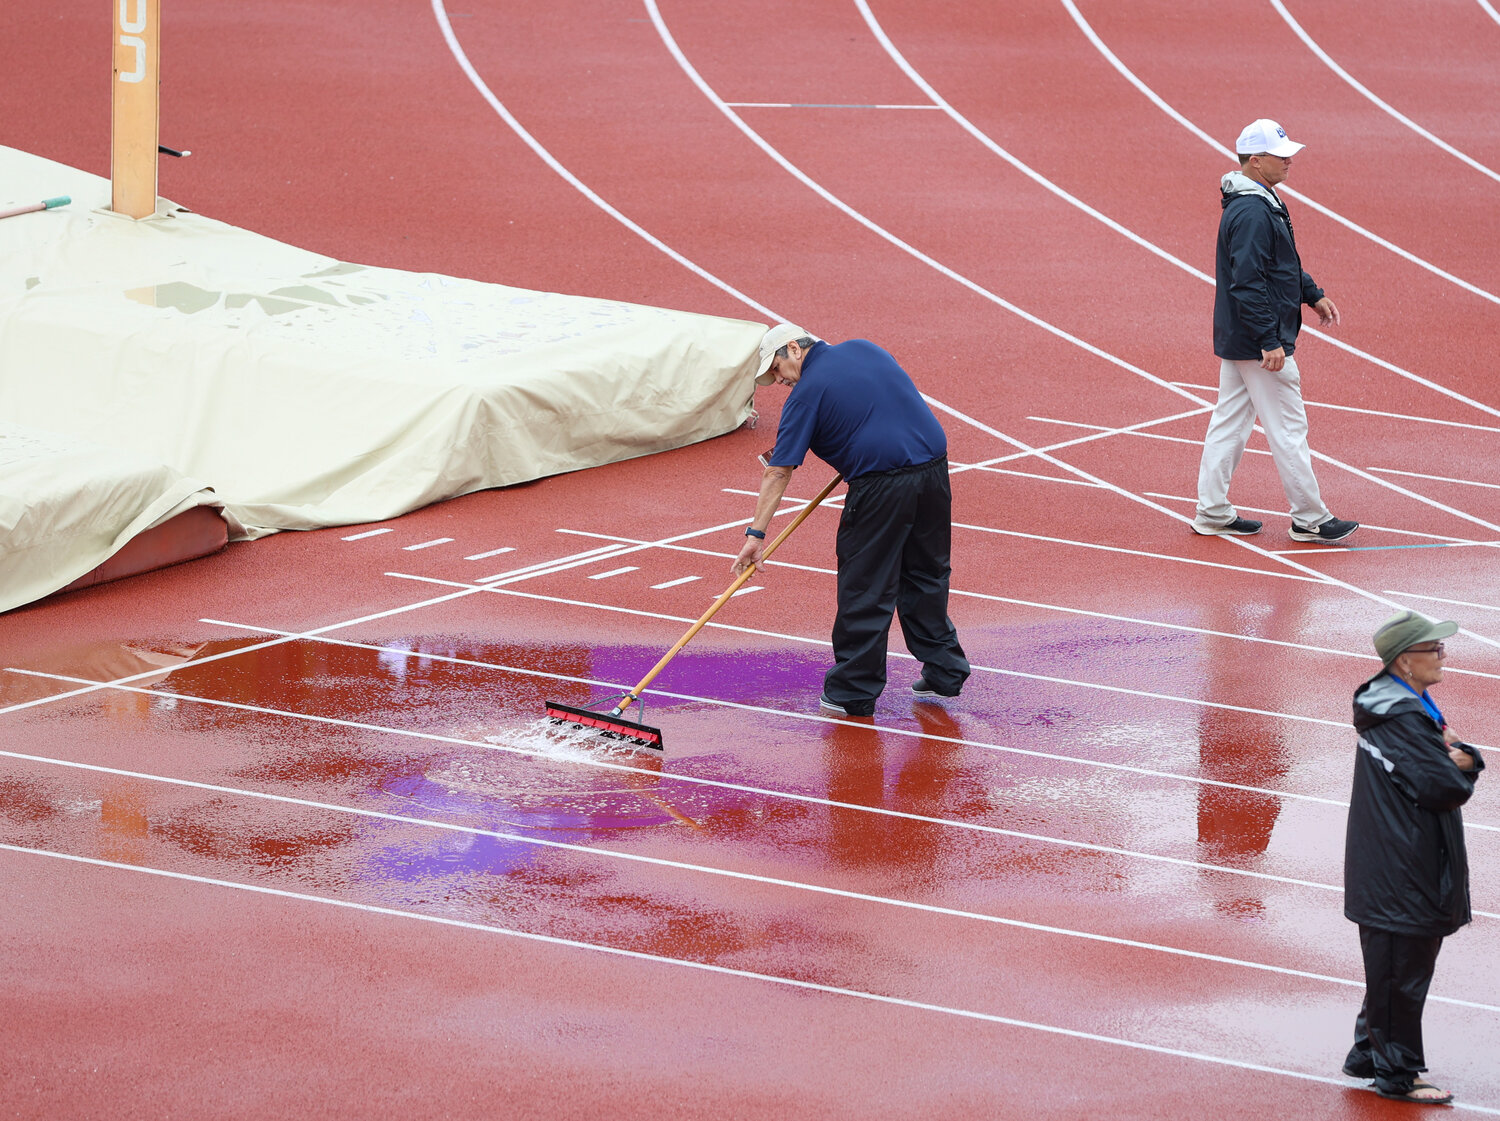 A volunteer clears the approach area in front of the pole vault venue of standing water following a rain delay during the UIL State Track and Field Meet on Saturday, May 13, 2023 in Austin.